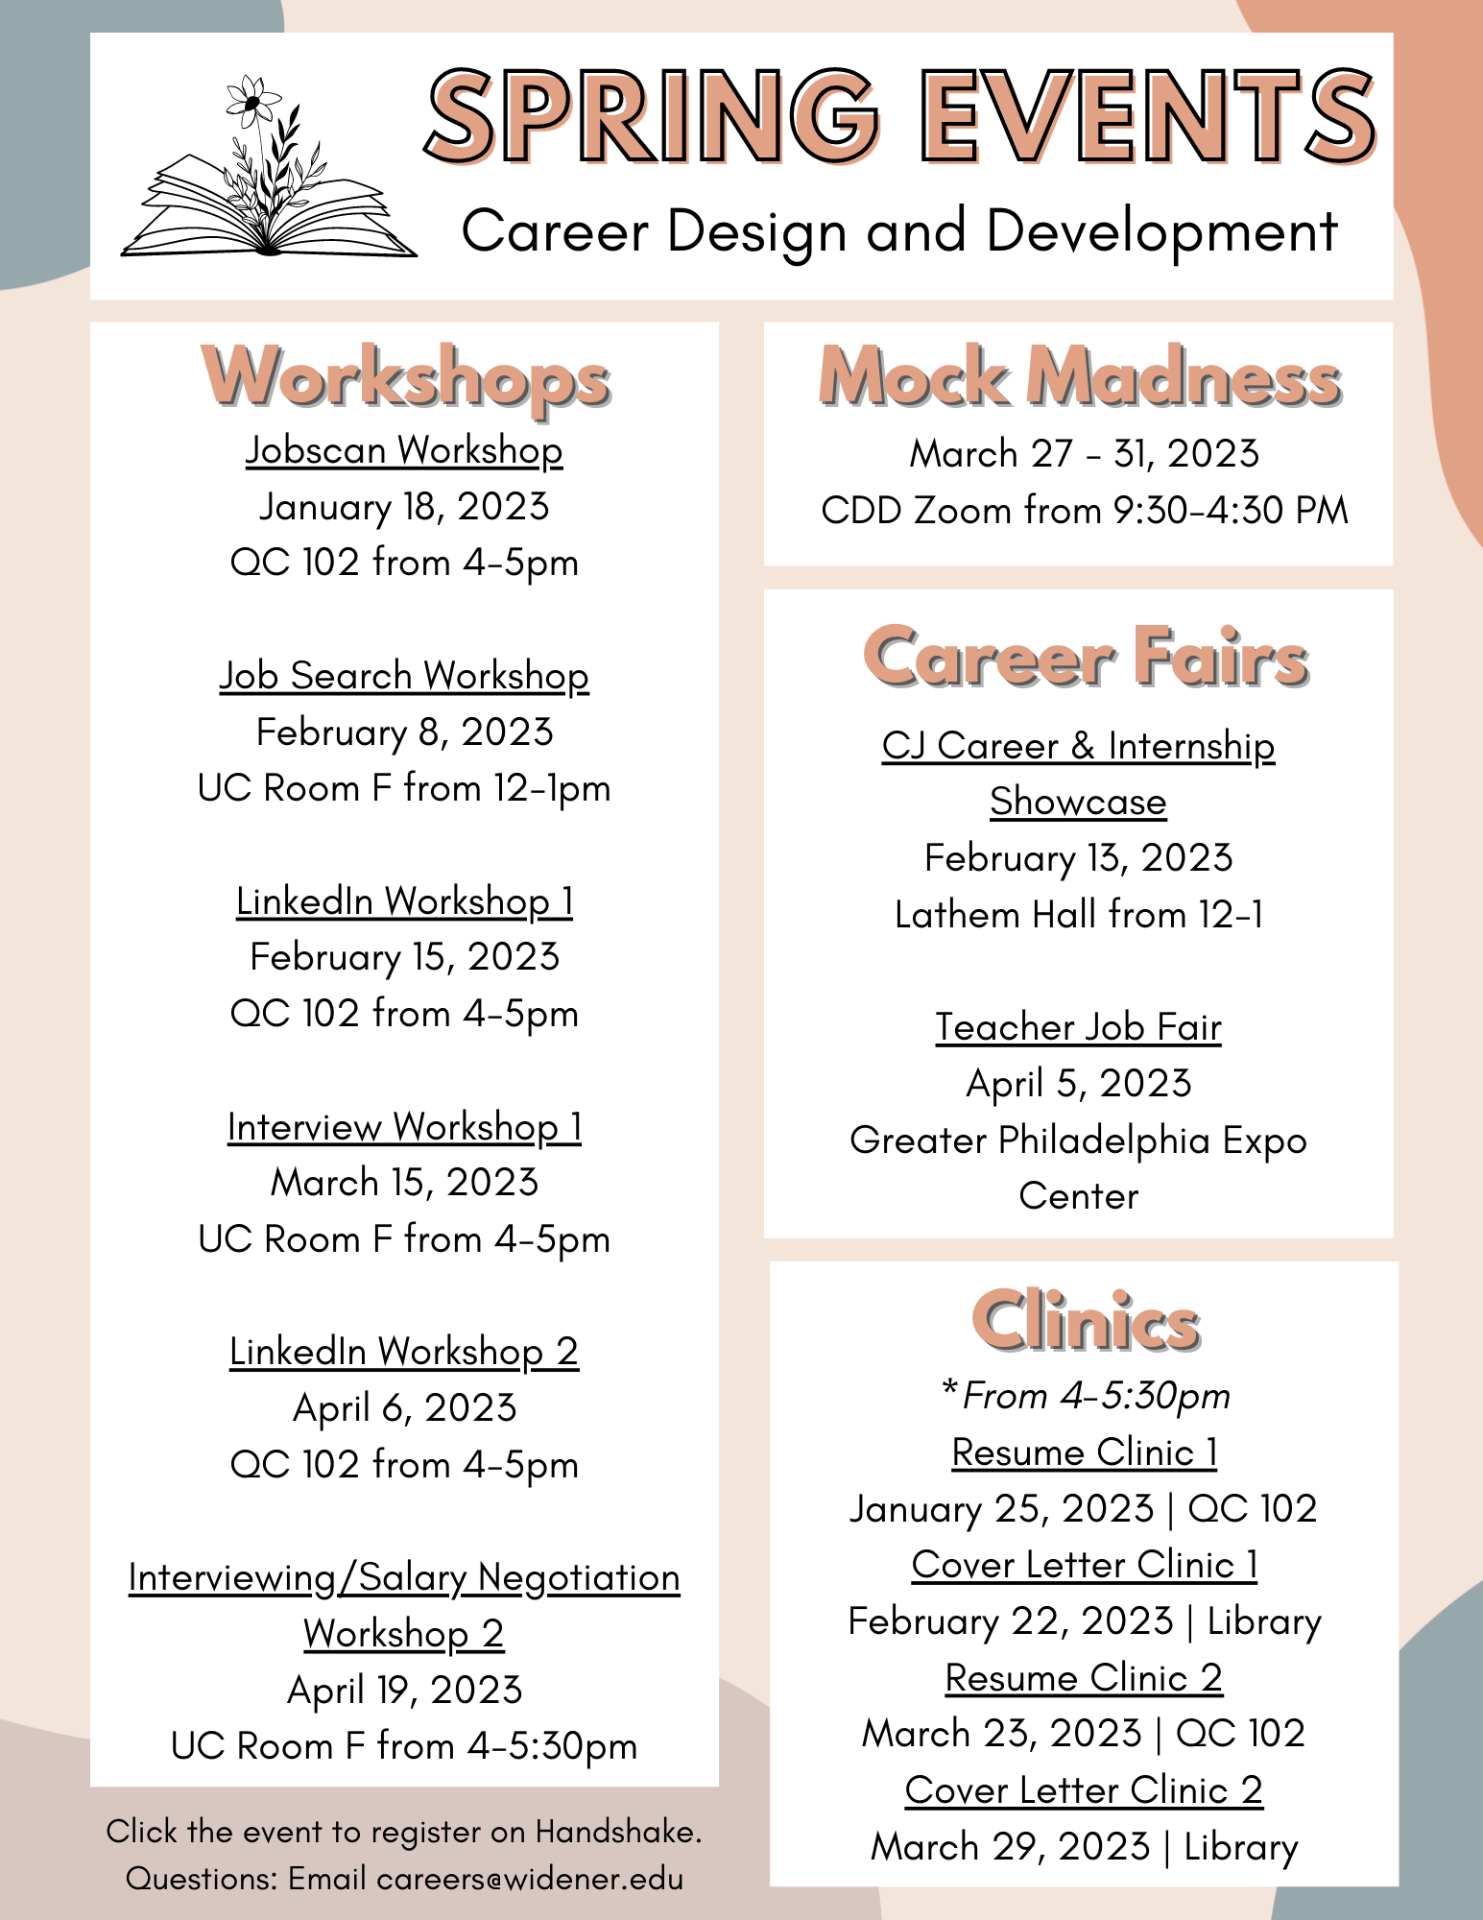 An image of a flyer which reads Spring Events
Career Design and Development
On the left side: Workshops
Jobscan Workshop
January 18, 2023
QC 102 from 4-5pm

Job Search Workshop
February 8, 2023
UC Room F from 12-1pm

LinkedIn Workshop 1
February 15, 2023
QC 102 from 4-5pm
Interview Workshop 1
March 15, 2023
UC Room F from 4-5pm

LinkedIn Workshop 2
April 6, 2023
QC 102 from 4-5pm

Interviewing/Salary Negotiation Workshop 2
April 19, 2023
UC Room F from 4-5:30pm

On the right side:
Mock Madness
March 27 - 31, 2023
CDD Zoom from 9:30-4:30 PM
Career Fairs
CJ Career & Internship Showcase
February 13, 2023
Lathem Hall from 12-1

Teacher Job Fair
April 5, 2023
Greater Philadelphia Expo Center (time TBD)
Clinics
*From 4-5:30pm
Resume Clinic 1
January 25, 2023 | QC 102

Cover Letter Clinic 1
February 22, 2023 | Library - Literacy Classroom

Resume Clinic 2
March 23, 2023 | QC 102

Cover Letter Clinic 2
March 29, 2023 | Library - Literacy Classroom